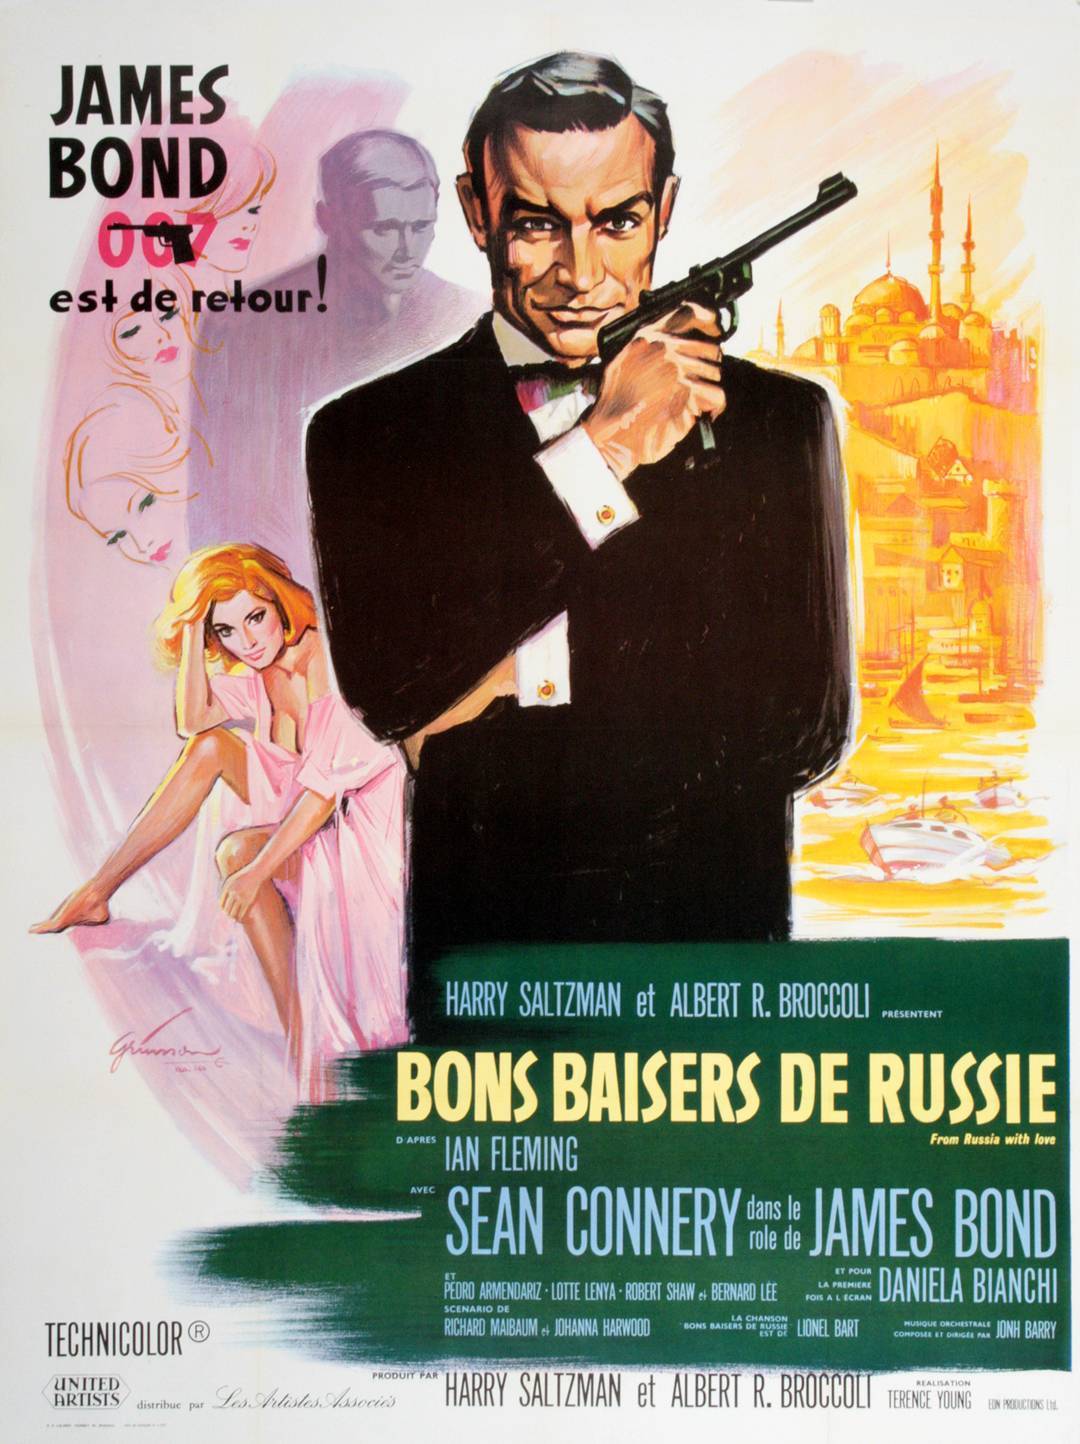 From Russia With Love - James Bond Poster from France 1973 Re Release